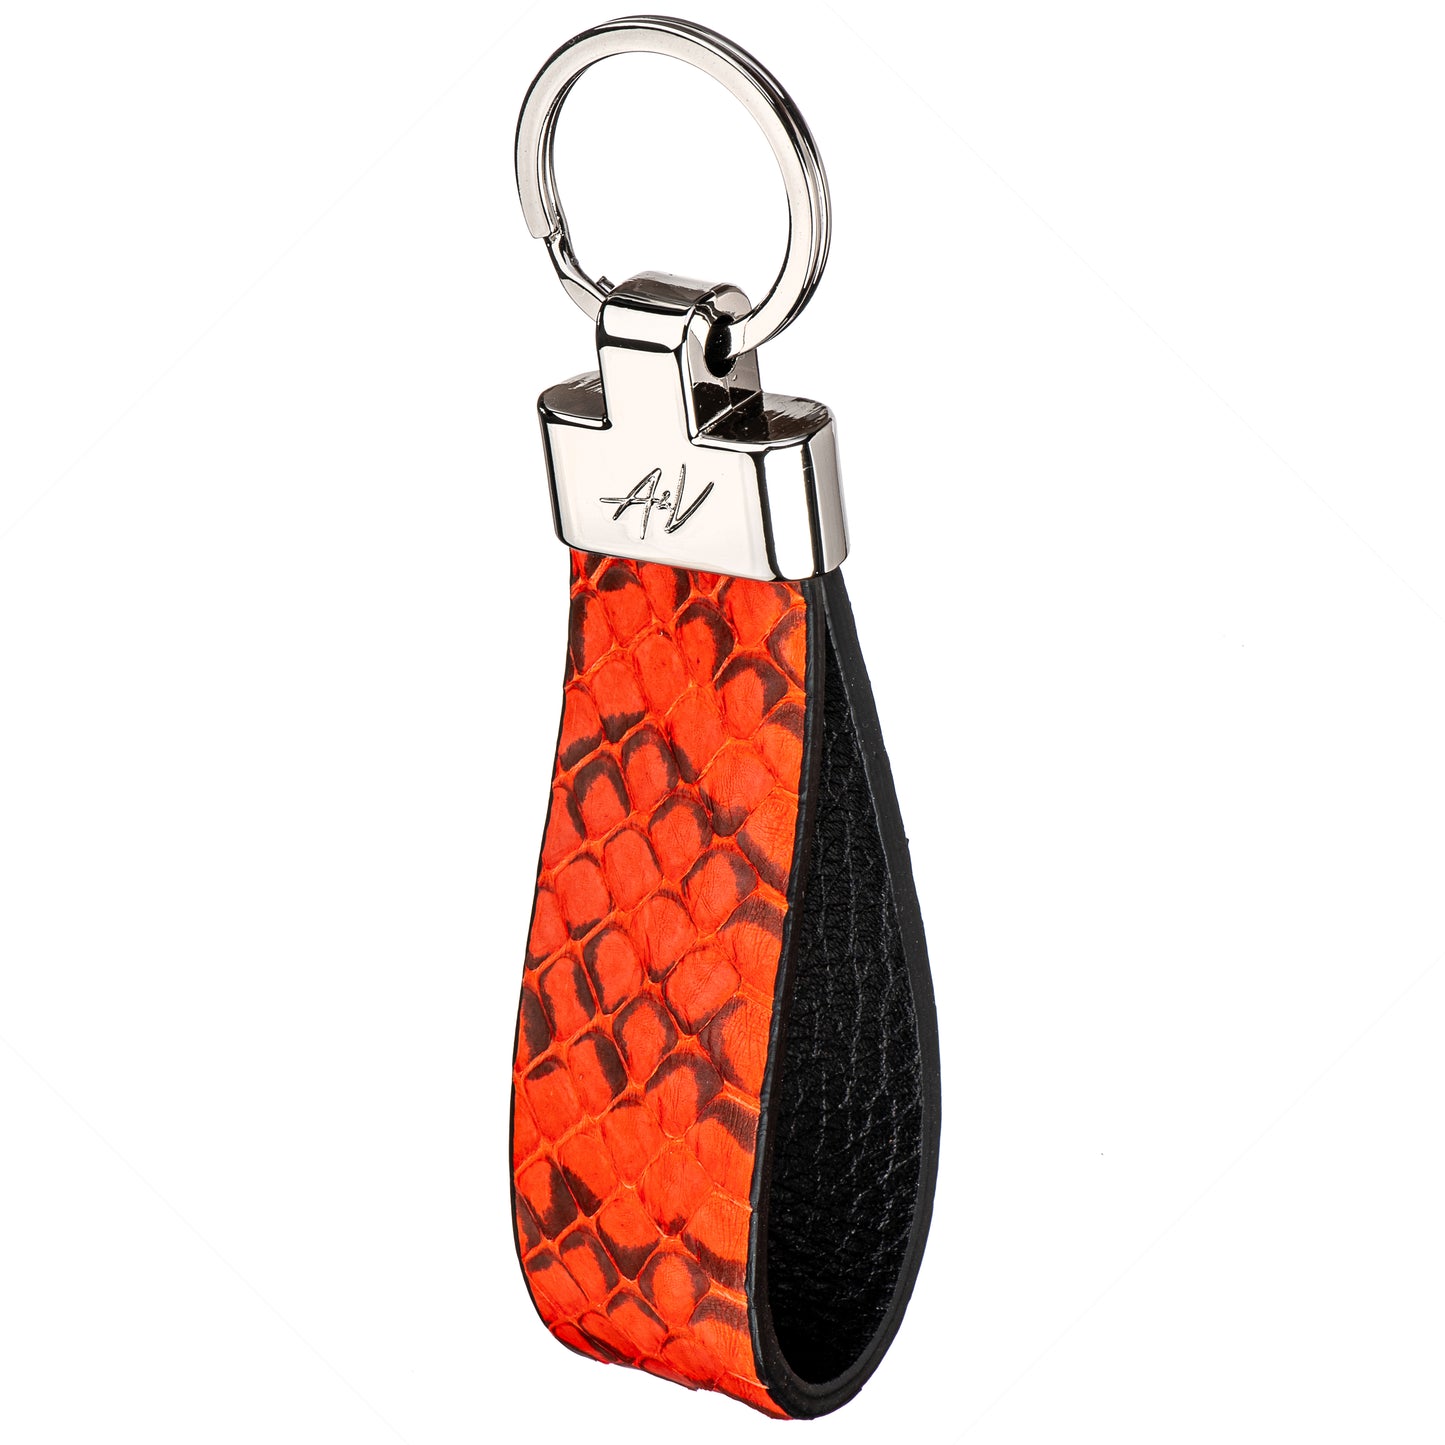 KEYCHAIN ROUNDED WARM COMFORT